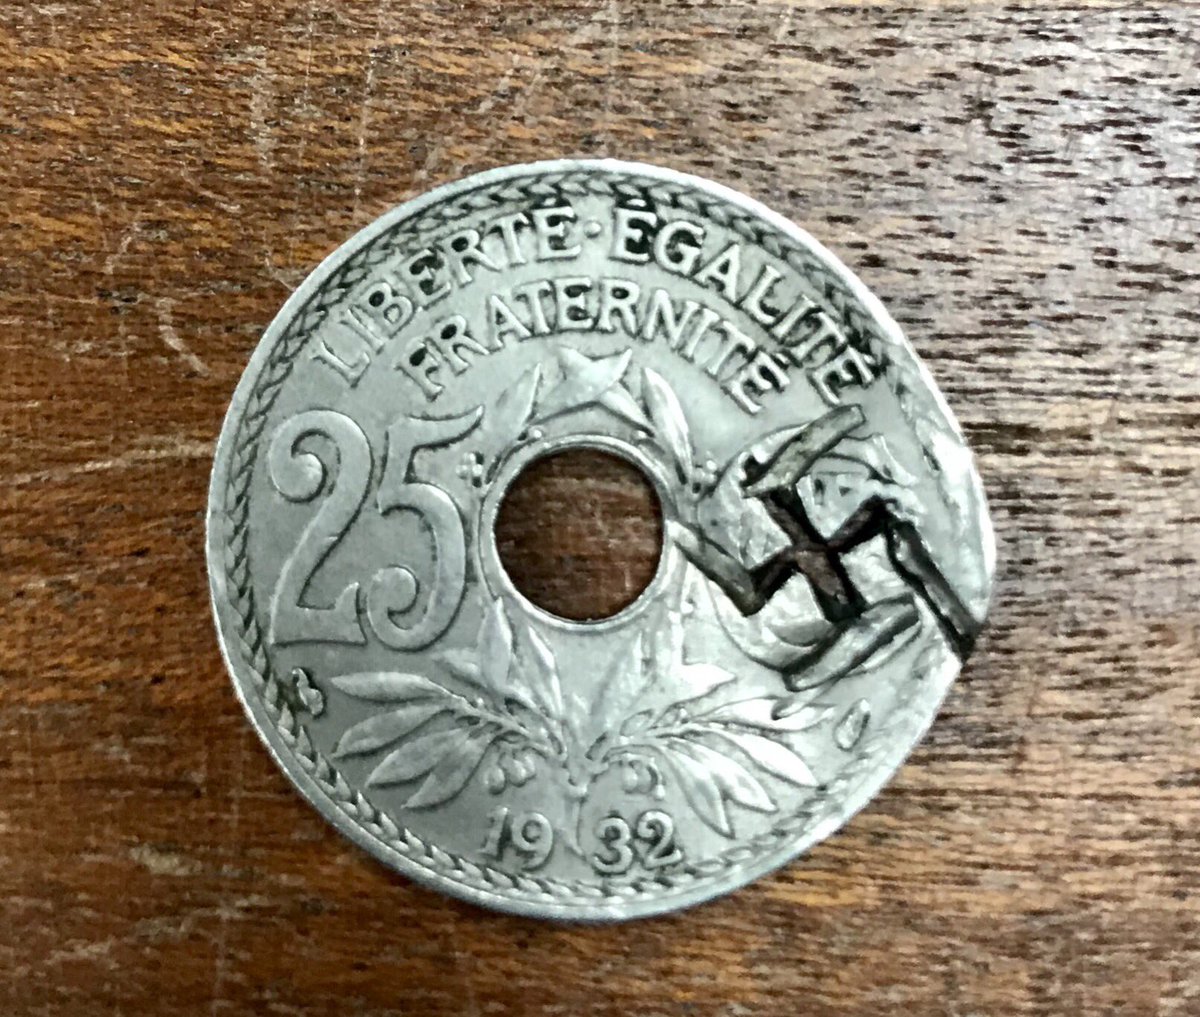 I found this one a particularly troubling object—a 1932 twenty-five centimes, countermarked with a swastika.